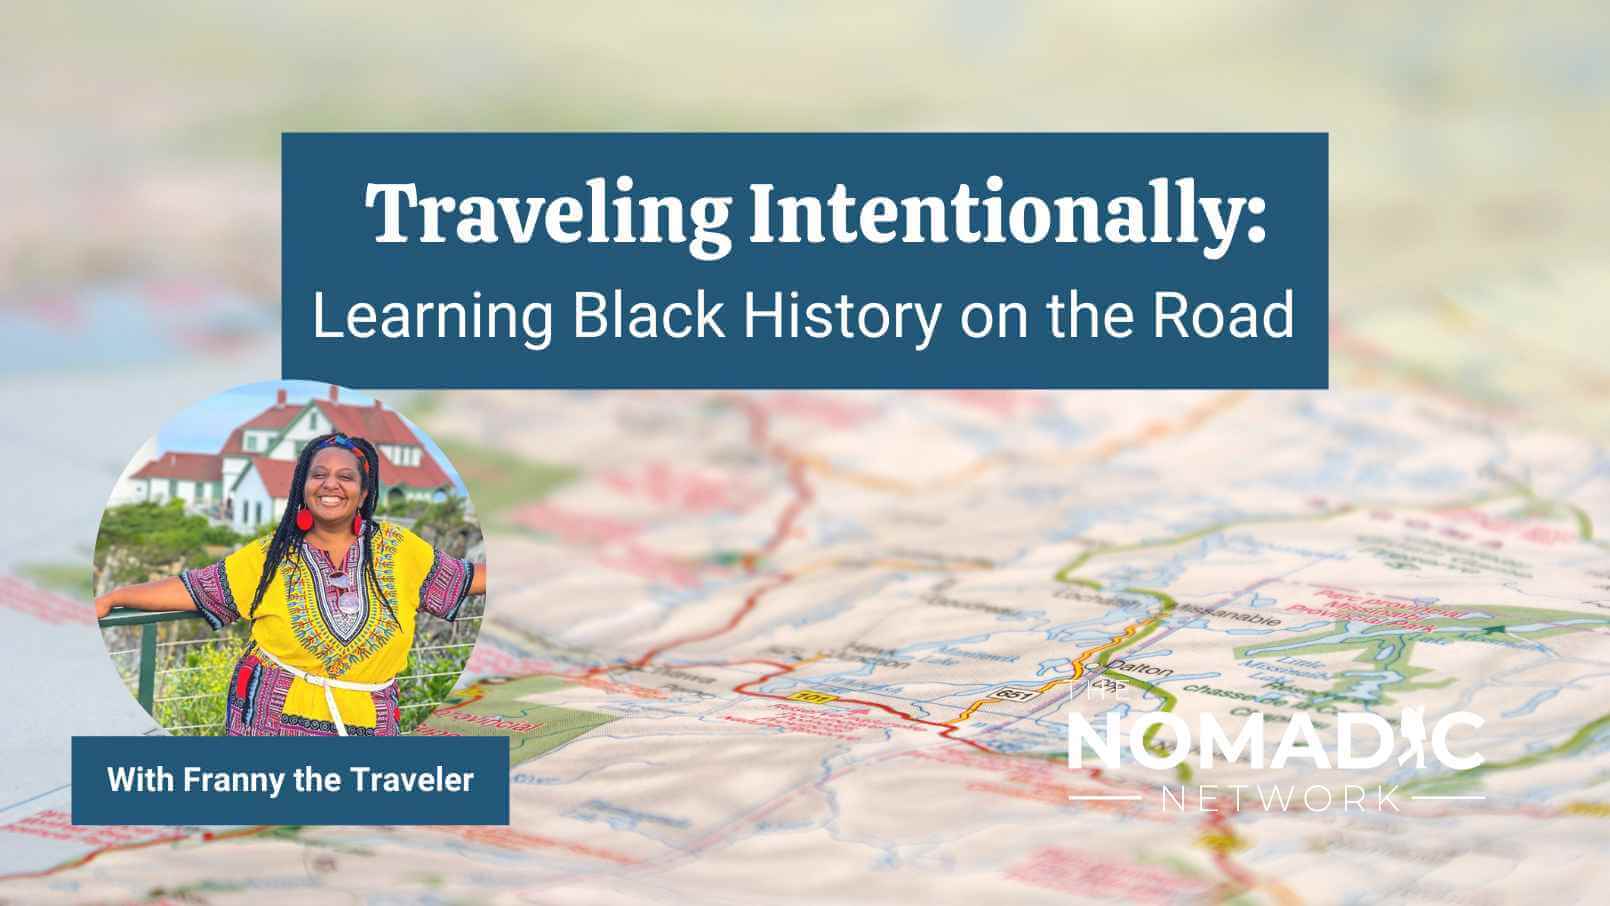 traveling intentionally by learning black history